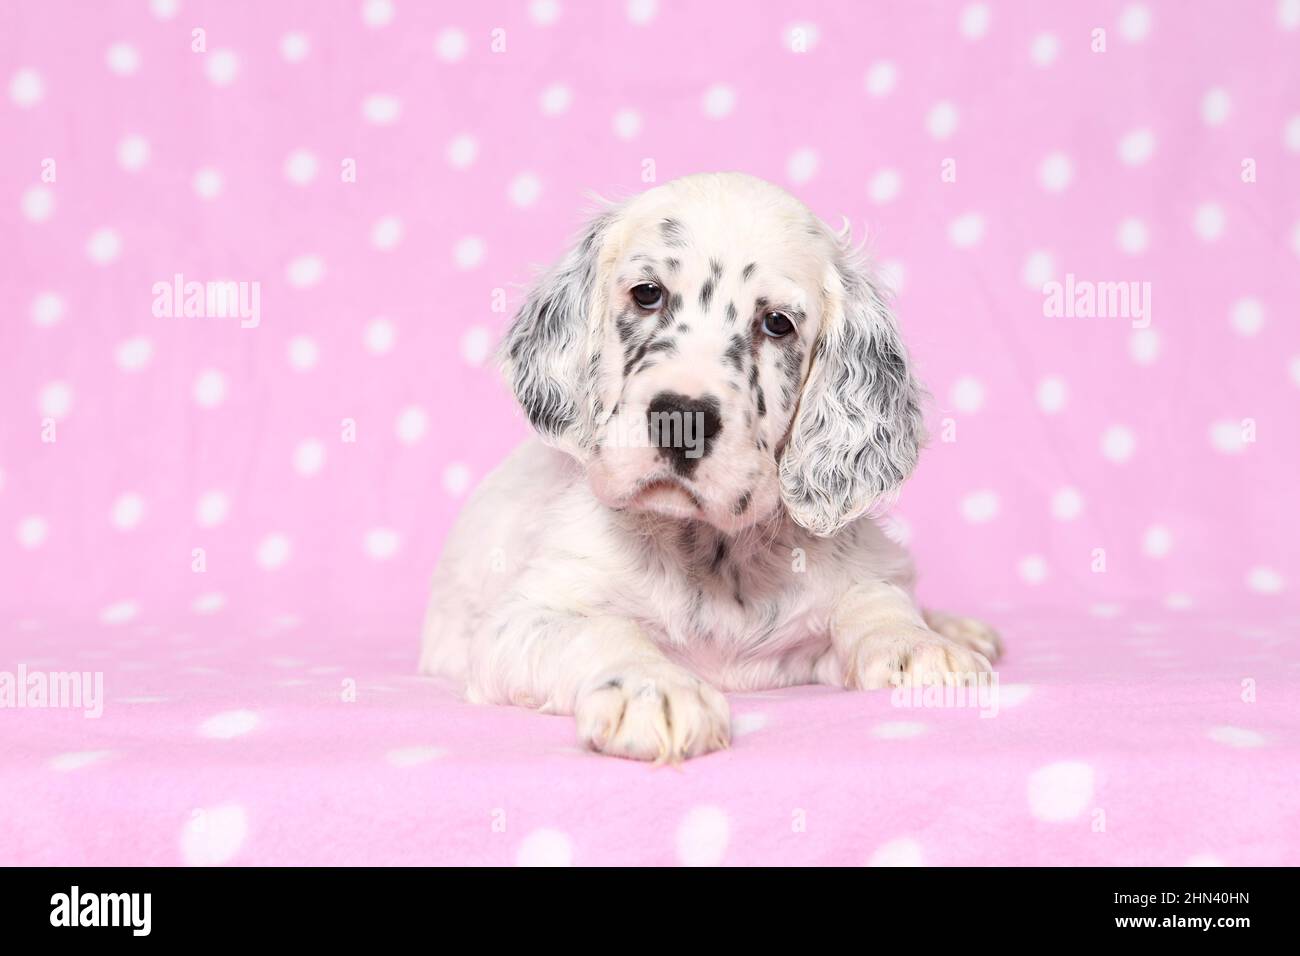 English Setter. Puppy lying on a pink blanket with polka dots. Germany Stock Photo